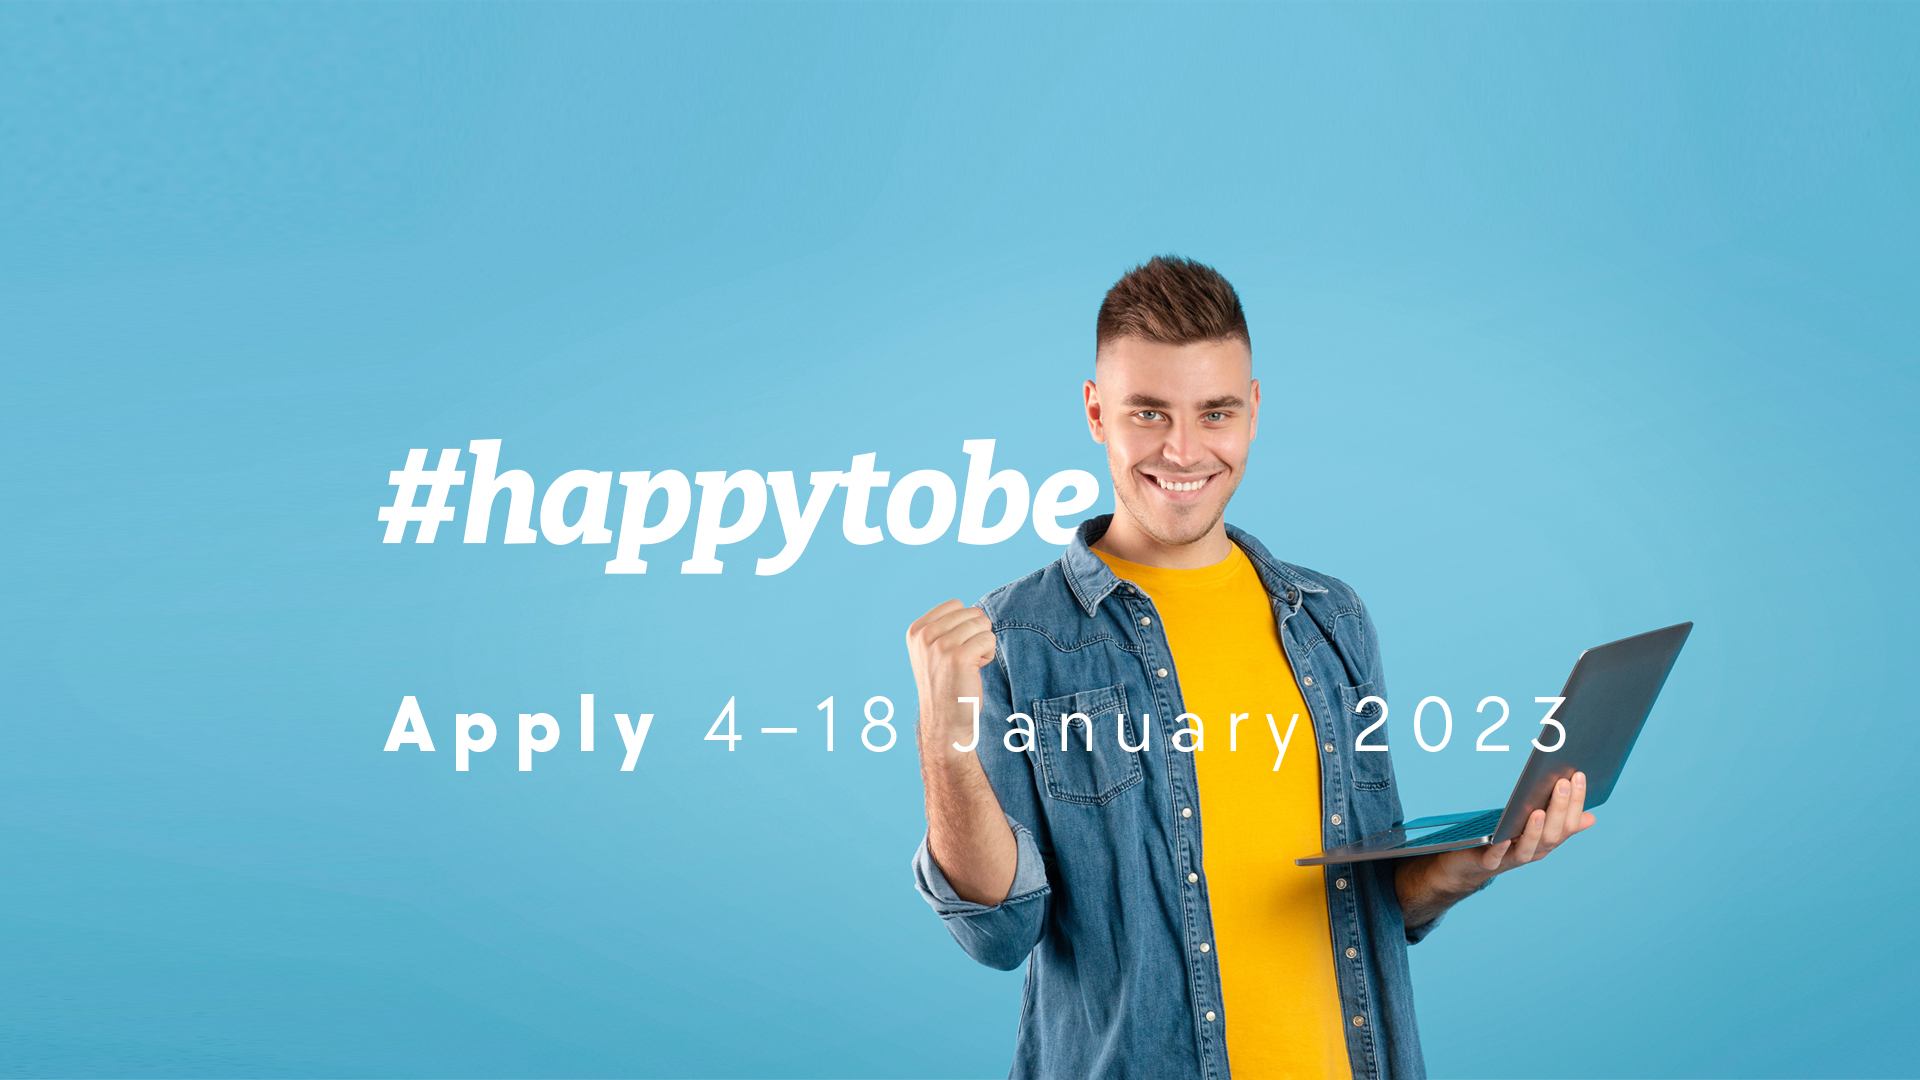 A man with yellow t-shirt is happy. Text: #happytobe, apply 4-18 january 2023